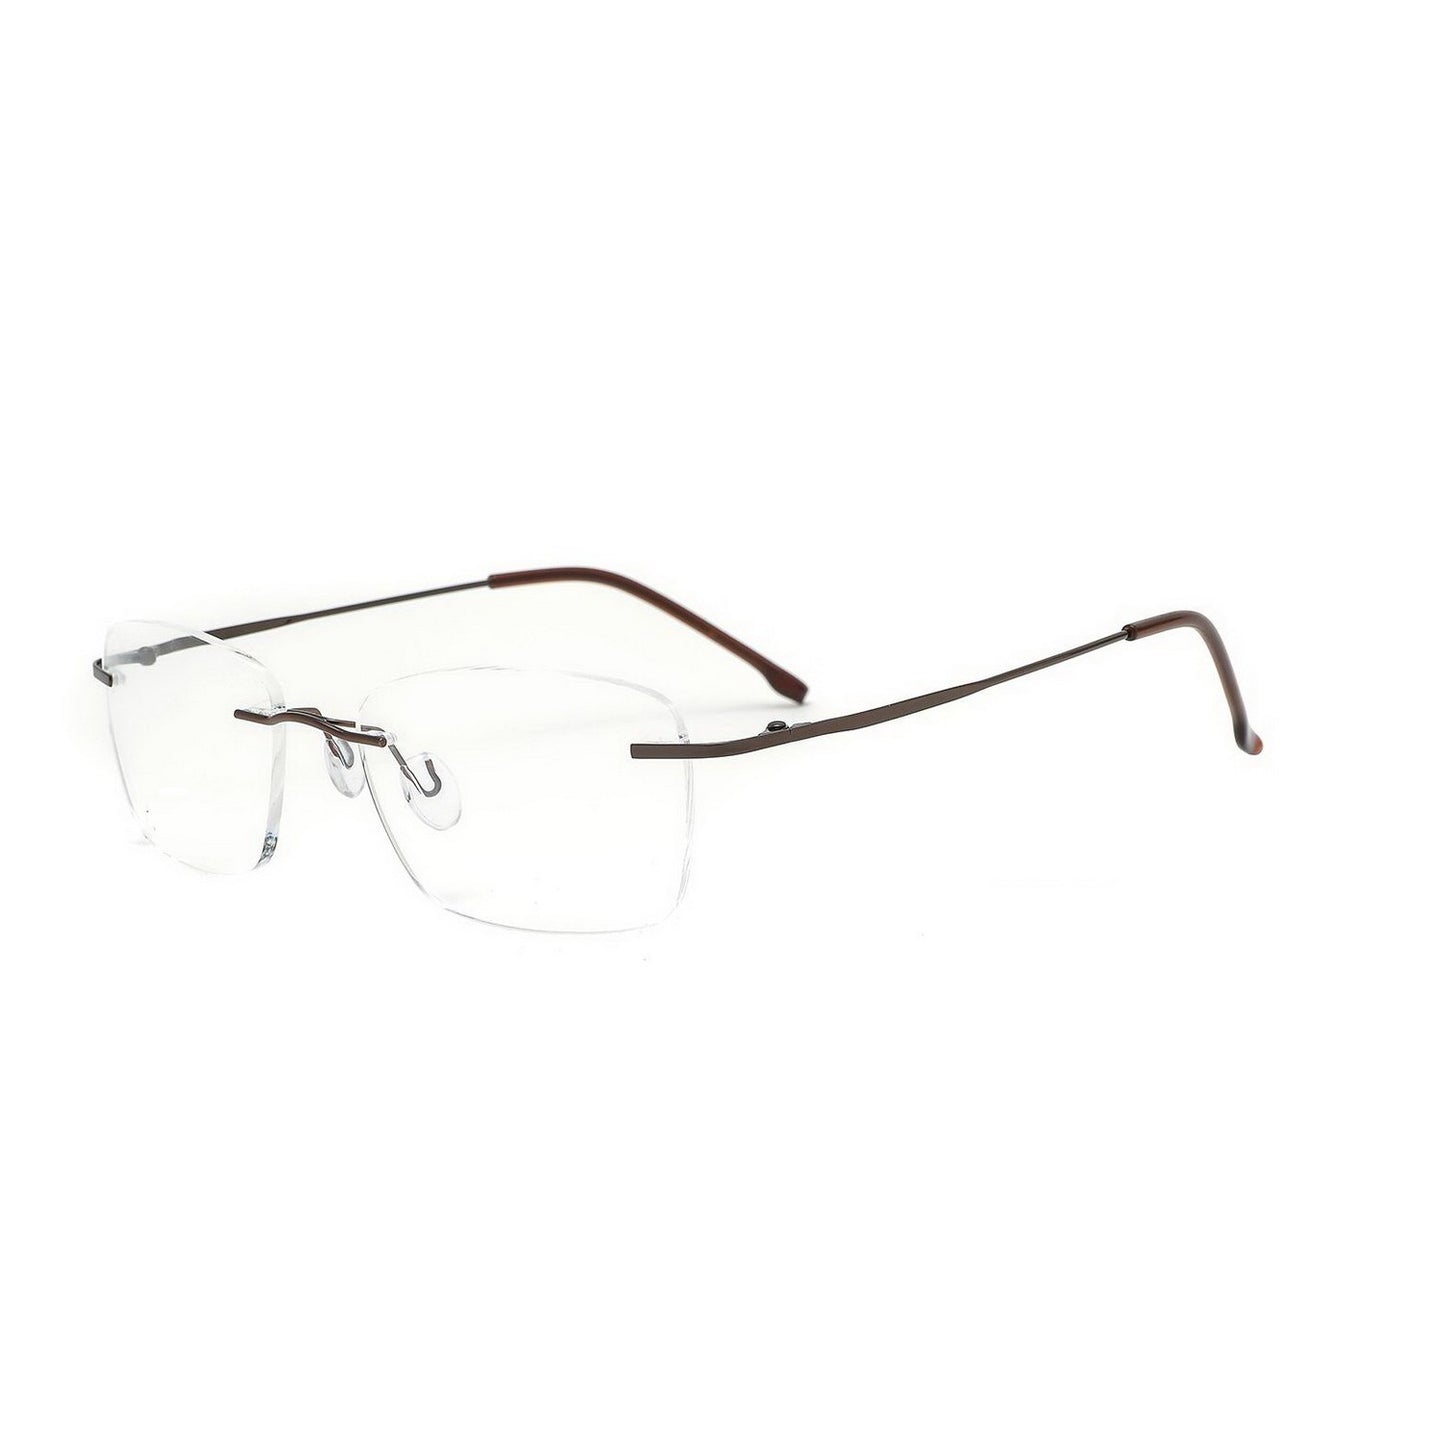 Rimless Glasses Spectacle Frame - Wide Rectangle Shape for Men and Women